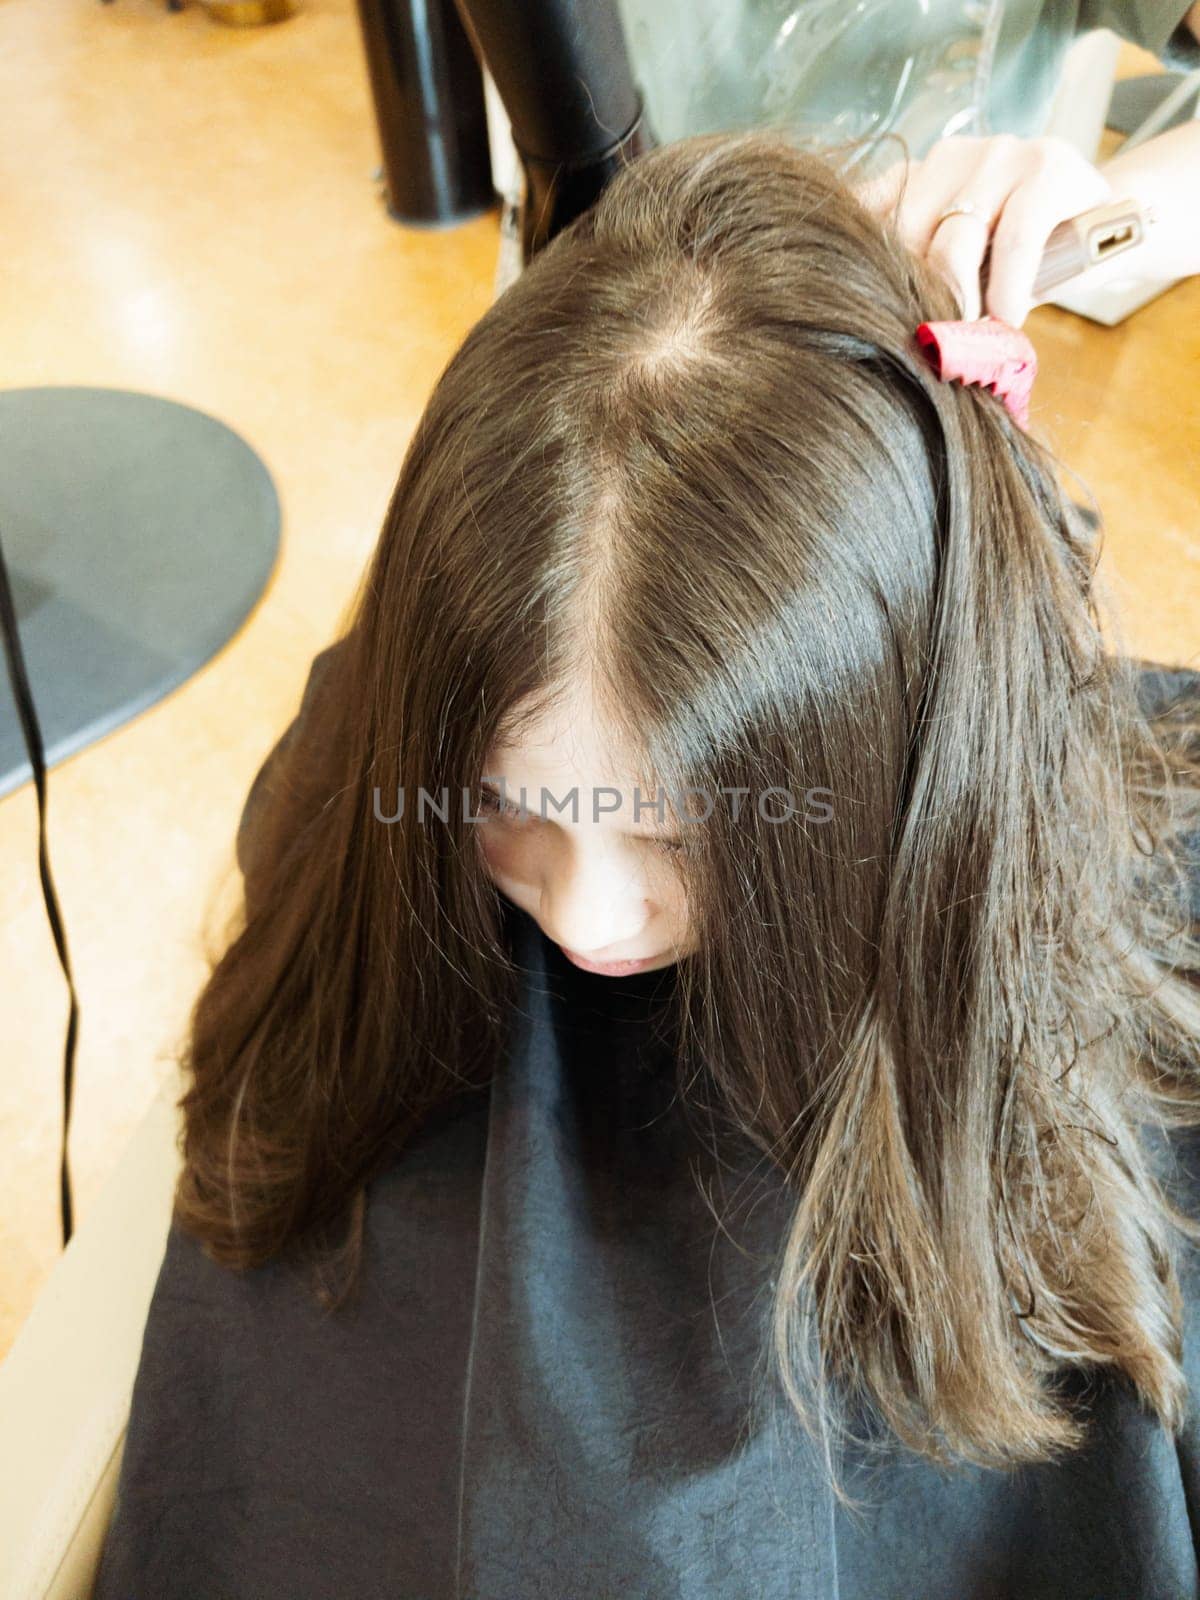 Gentle hands maneuver a hair dryer through a young girl's newly cut hair, showcasing the drying process after a meticulous trim. The warmth of the dryer breathes life into her locks, as they transform from damp to styled with care and expertise.